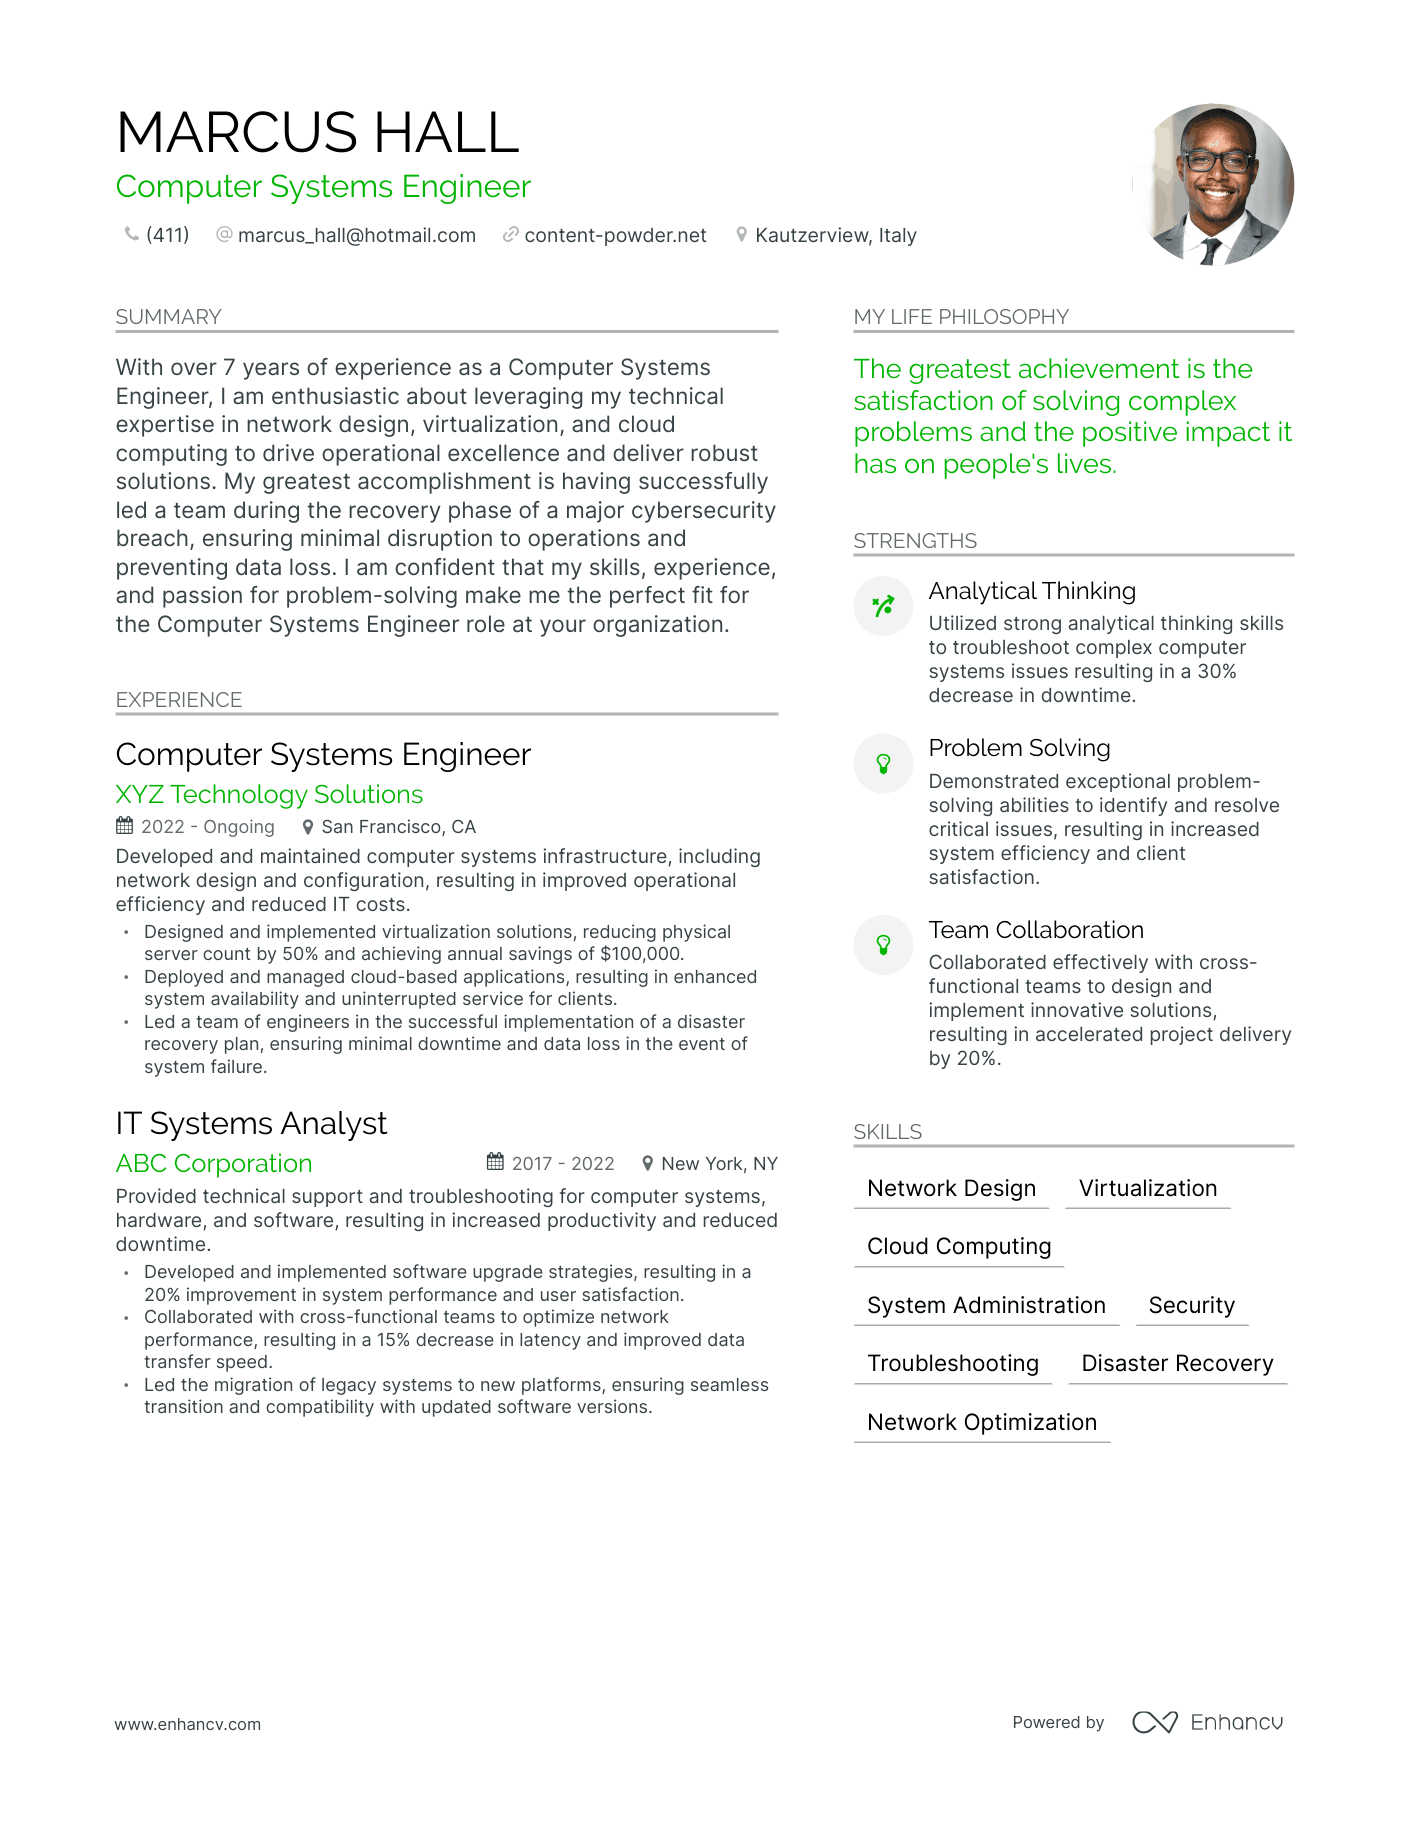 Computer Systems Engineer resume example